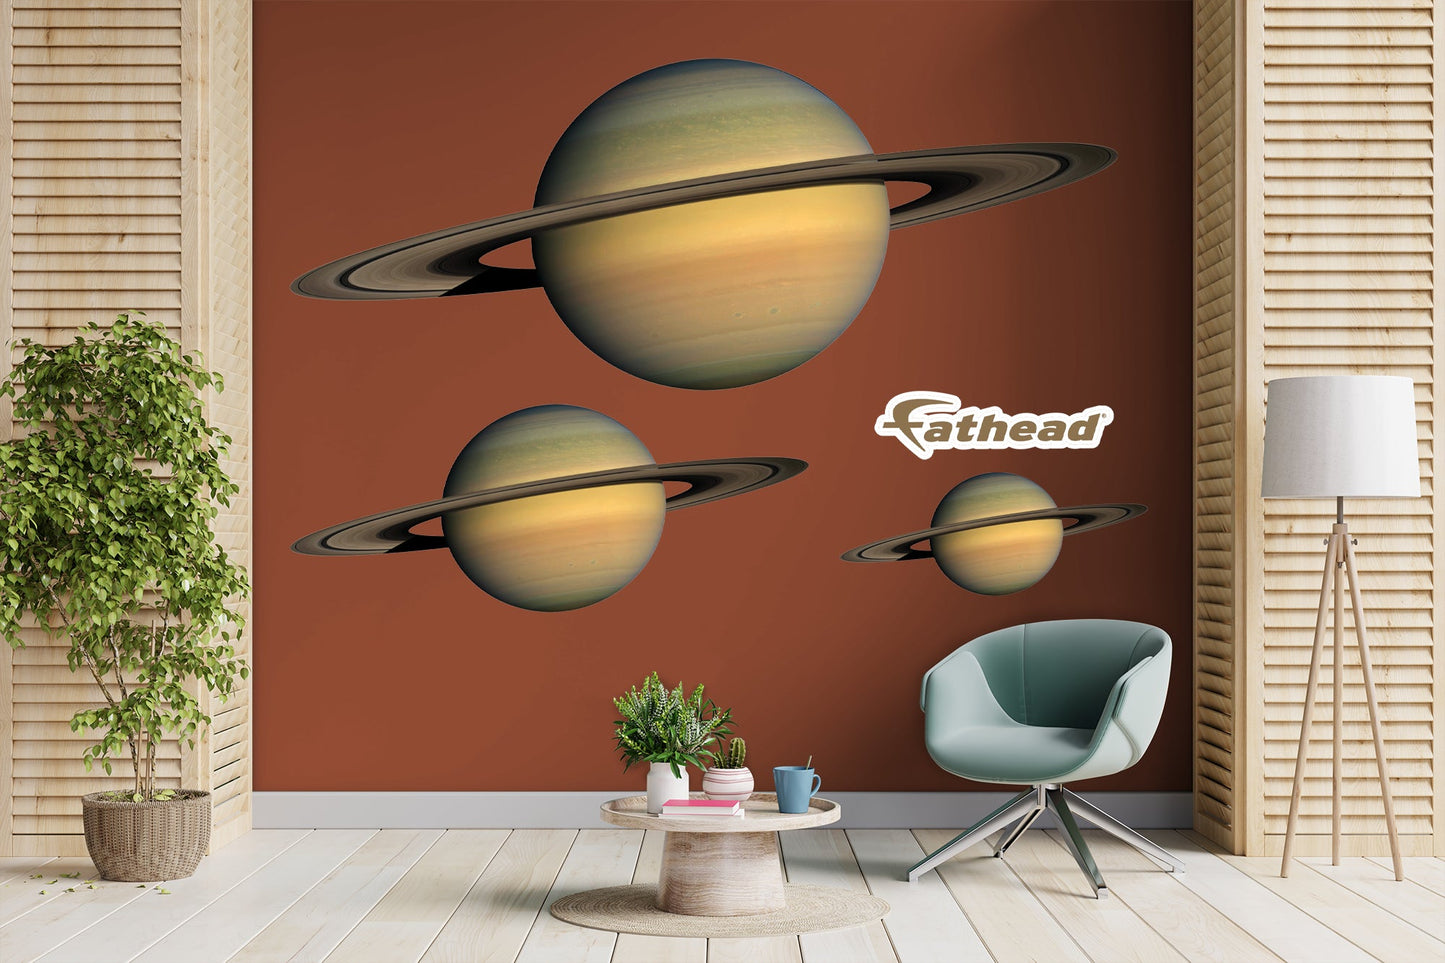 Planets: Saturn RealBig - Removable Adhesive Decal